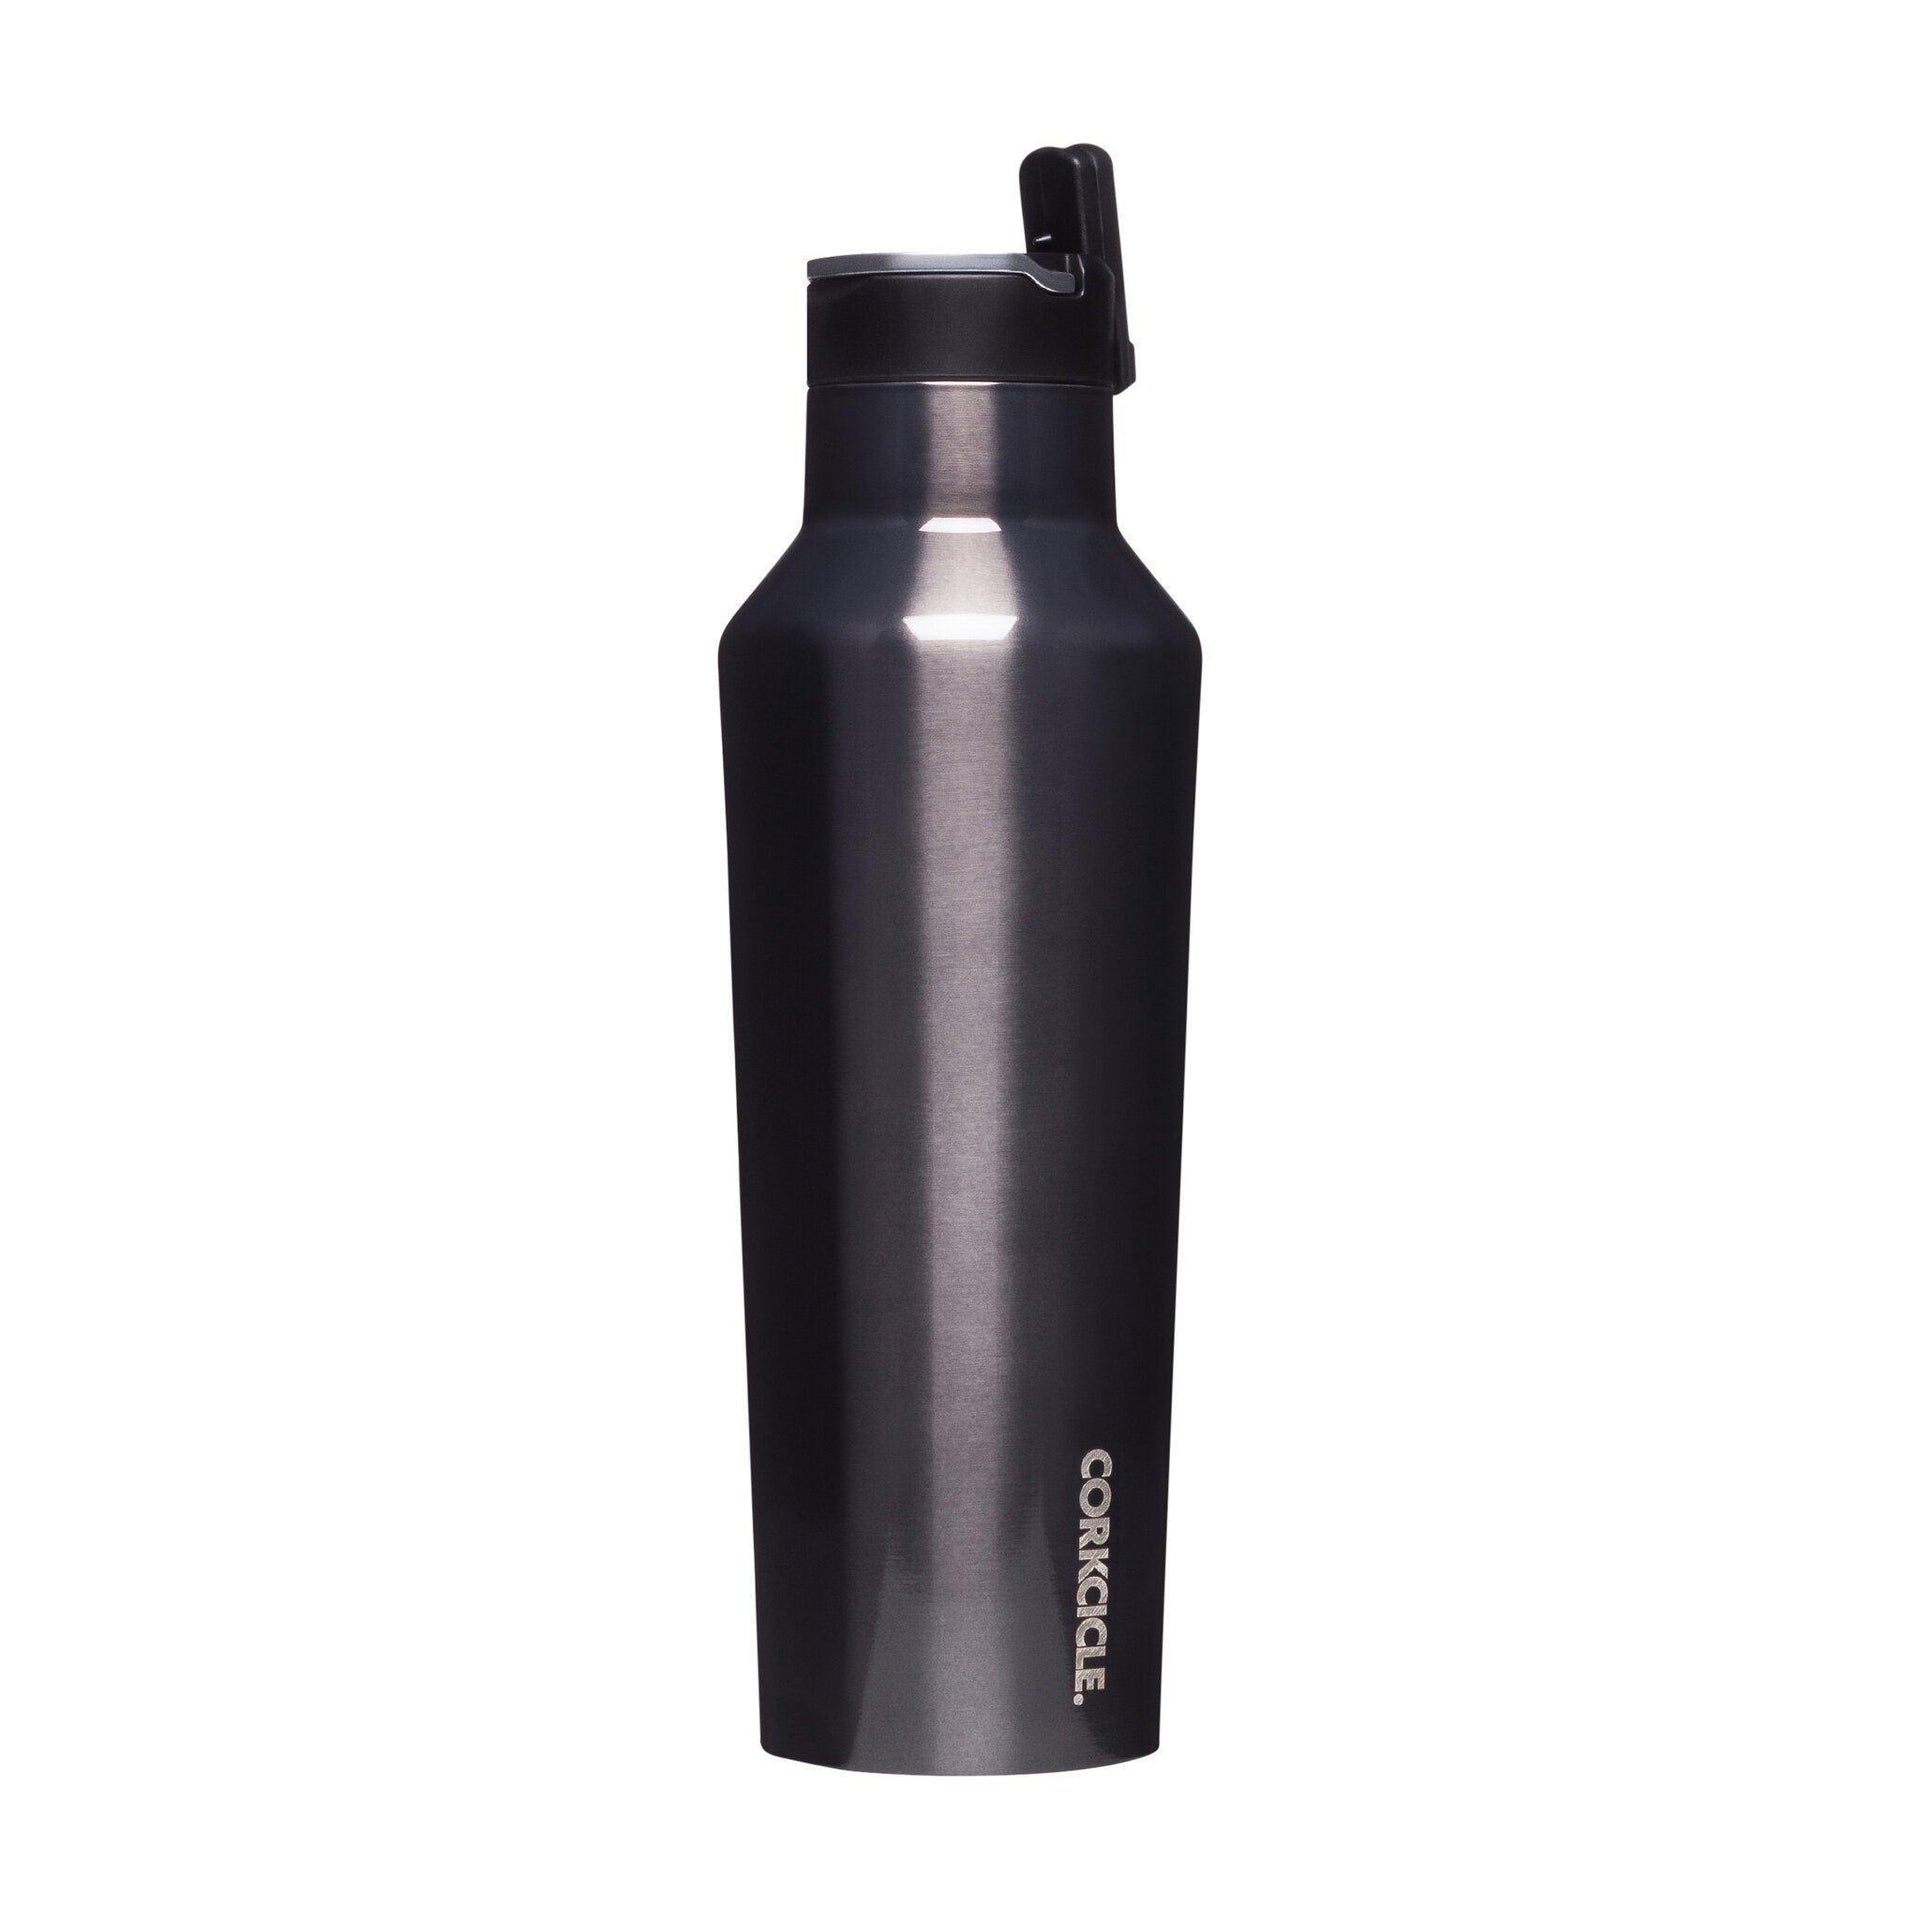 Corkcicle Sports Canteen Water Bottle Gunmetal 1.2L - Upcycle Studio